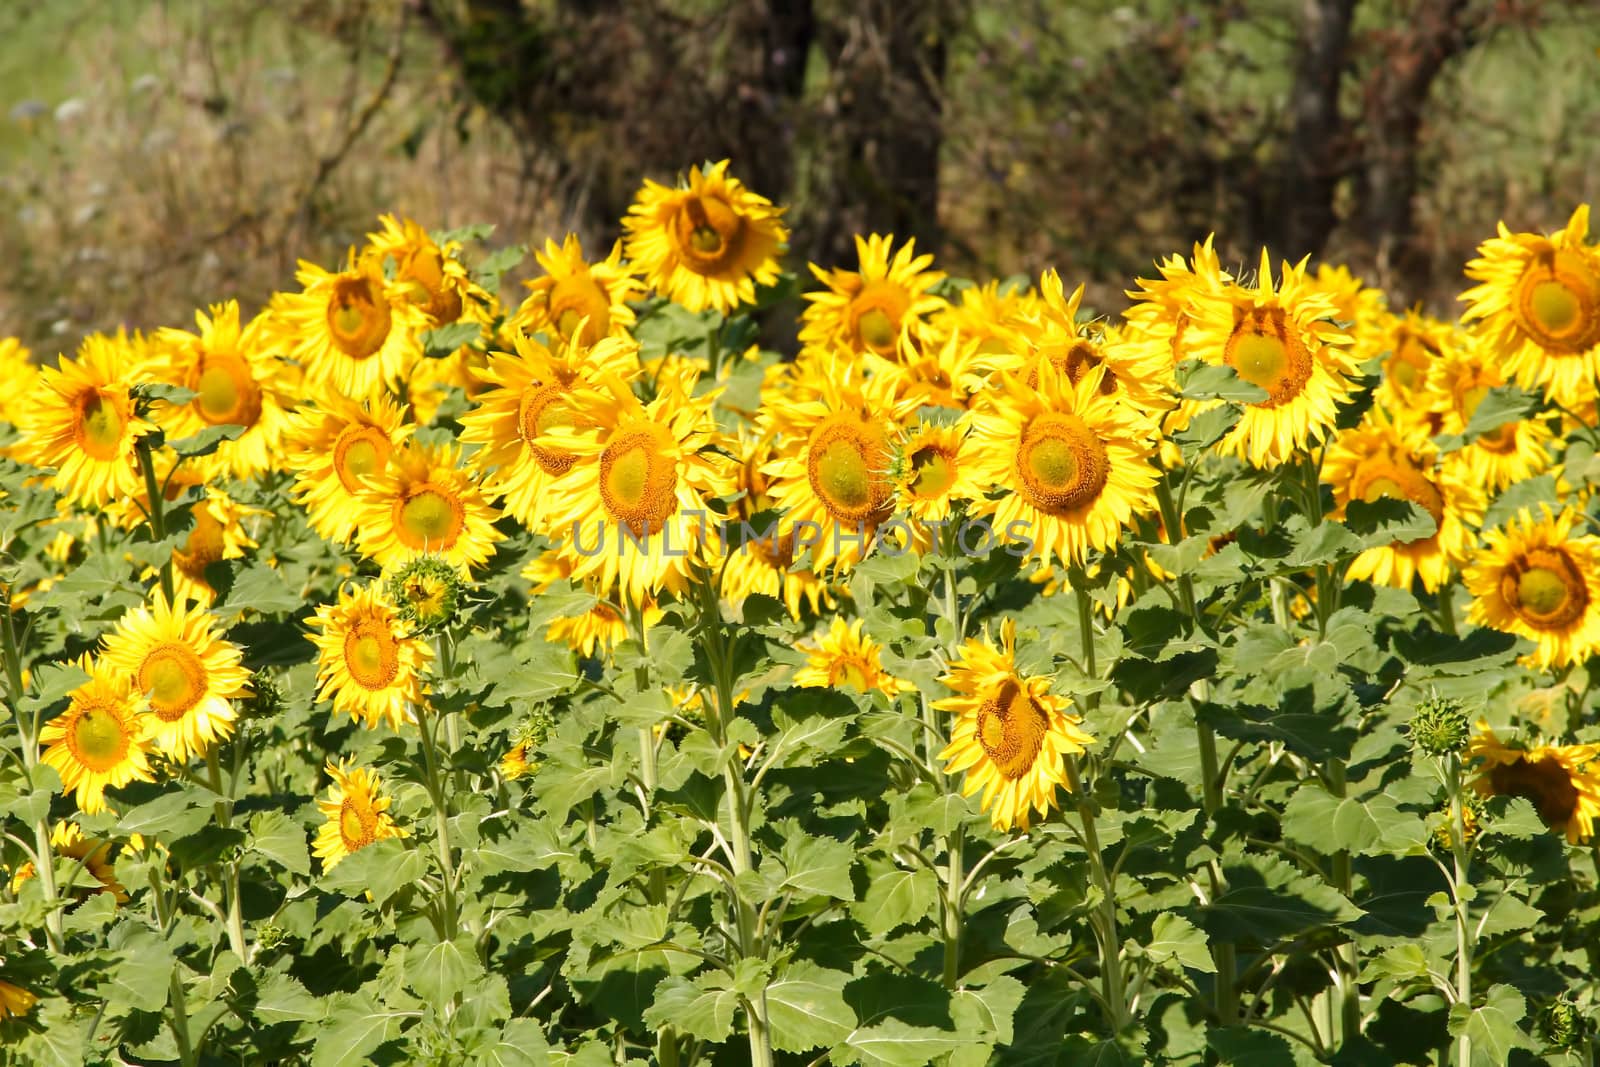 sunflowers by charlieisland